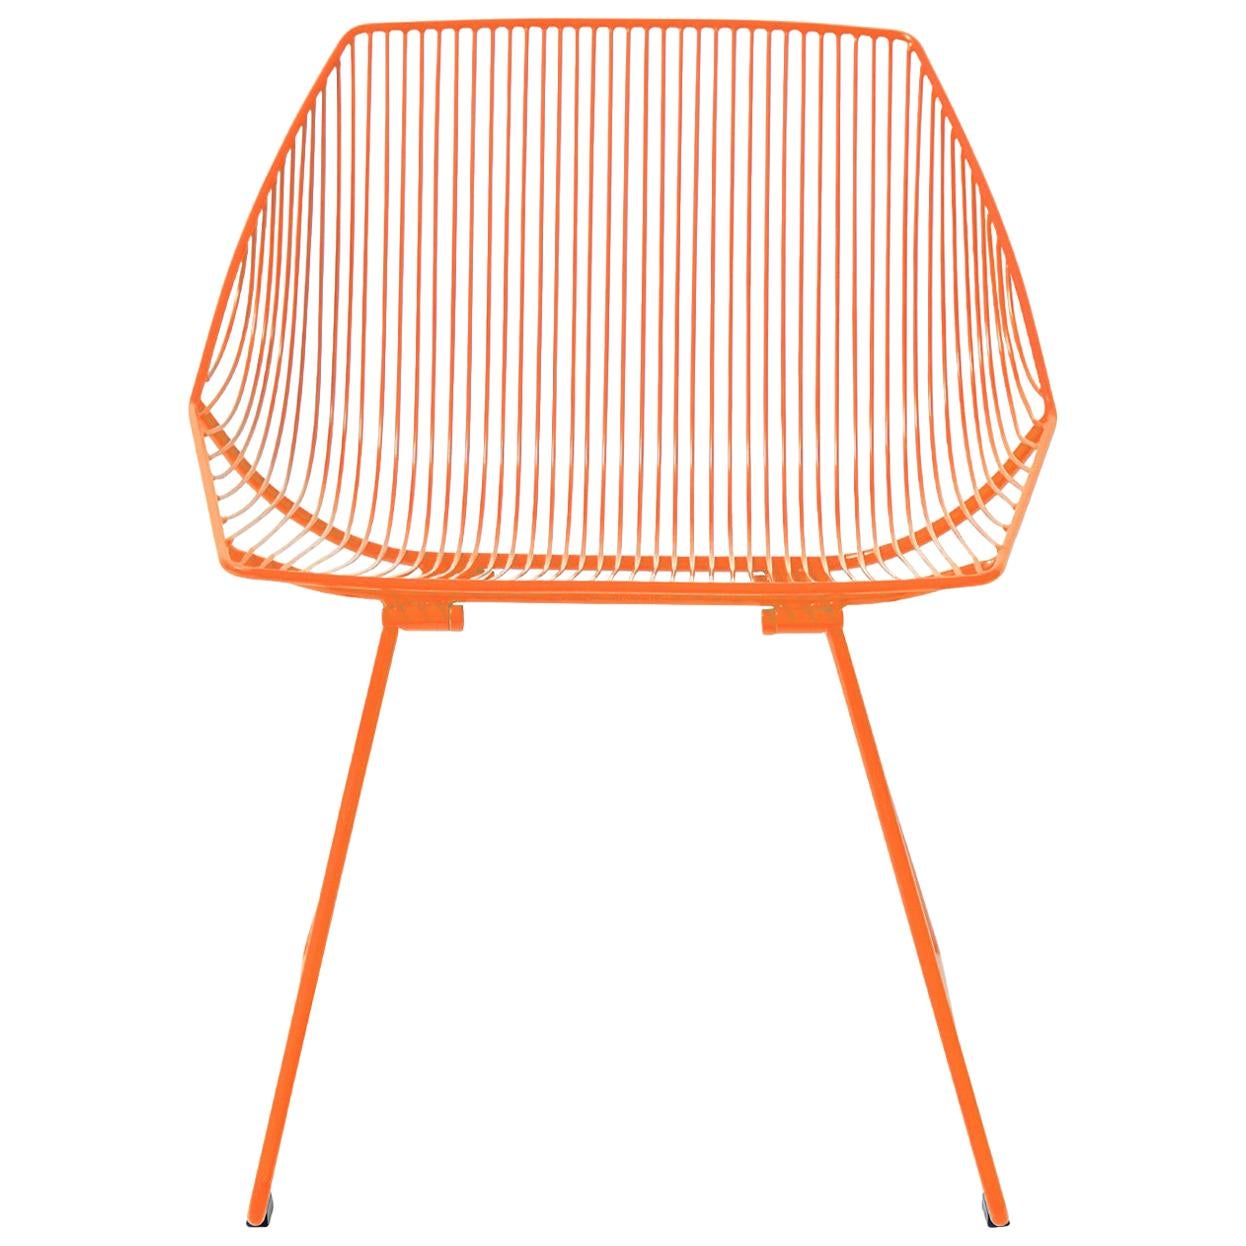 Minimalist Outdoor Wire Lounge Chair, the Bunny Lounge in Orange